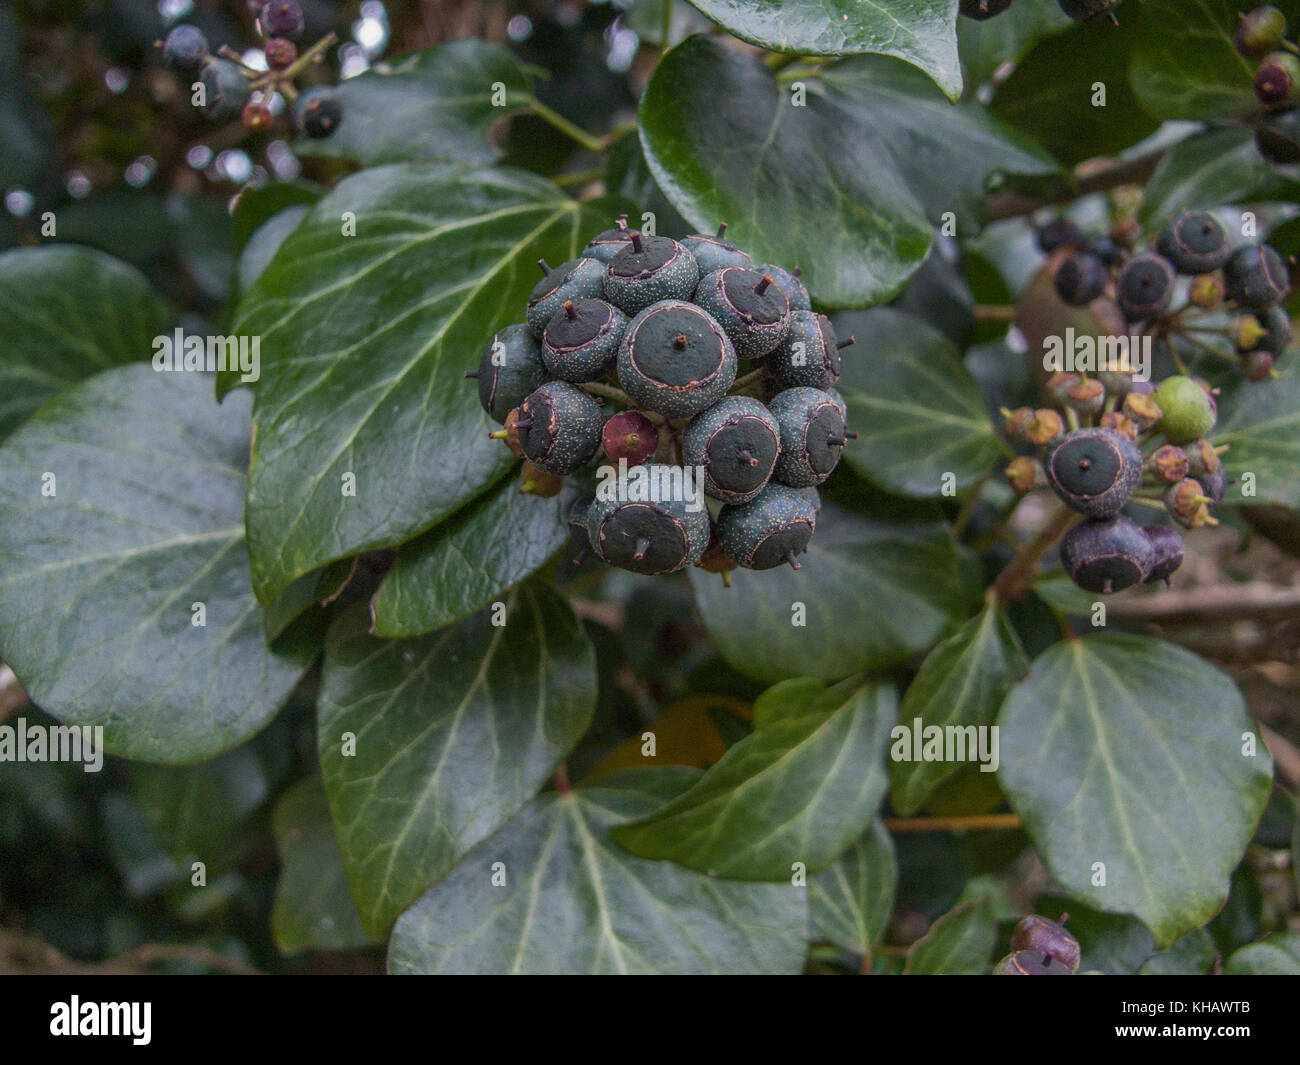 Close-up image of purple-black berries of Common Ivy / Hedera helix. Stock Photo